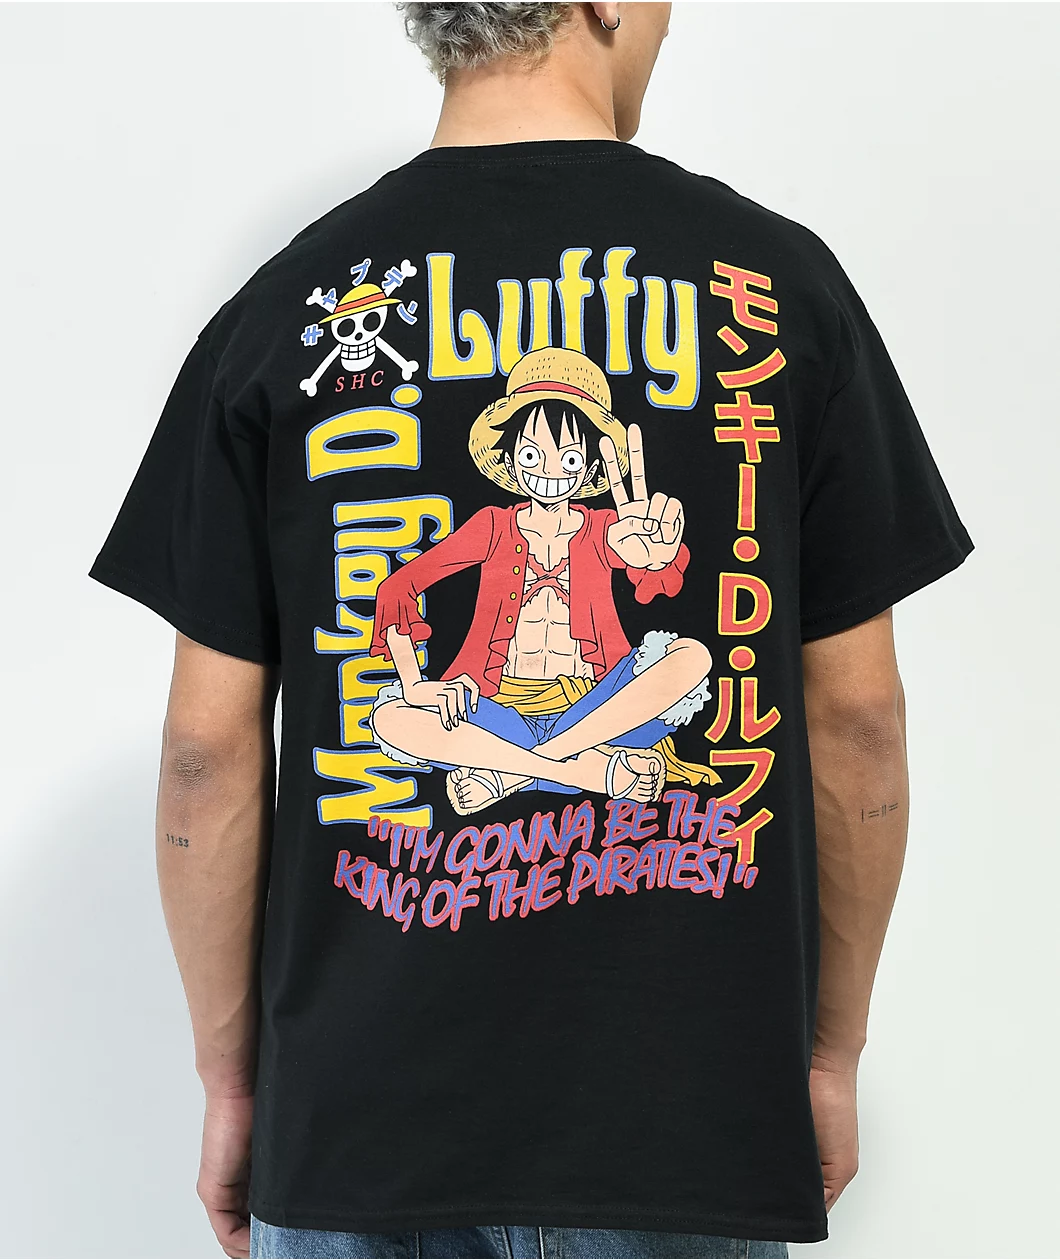 One Piece Luffy Black T Shirt 358940 front US - One Piece Clothing